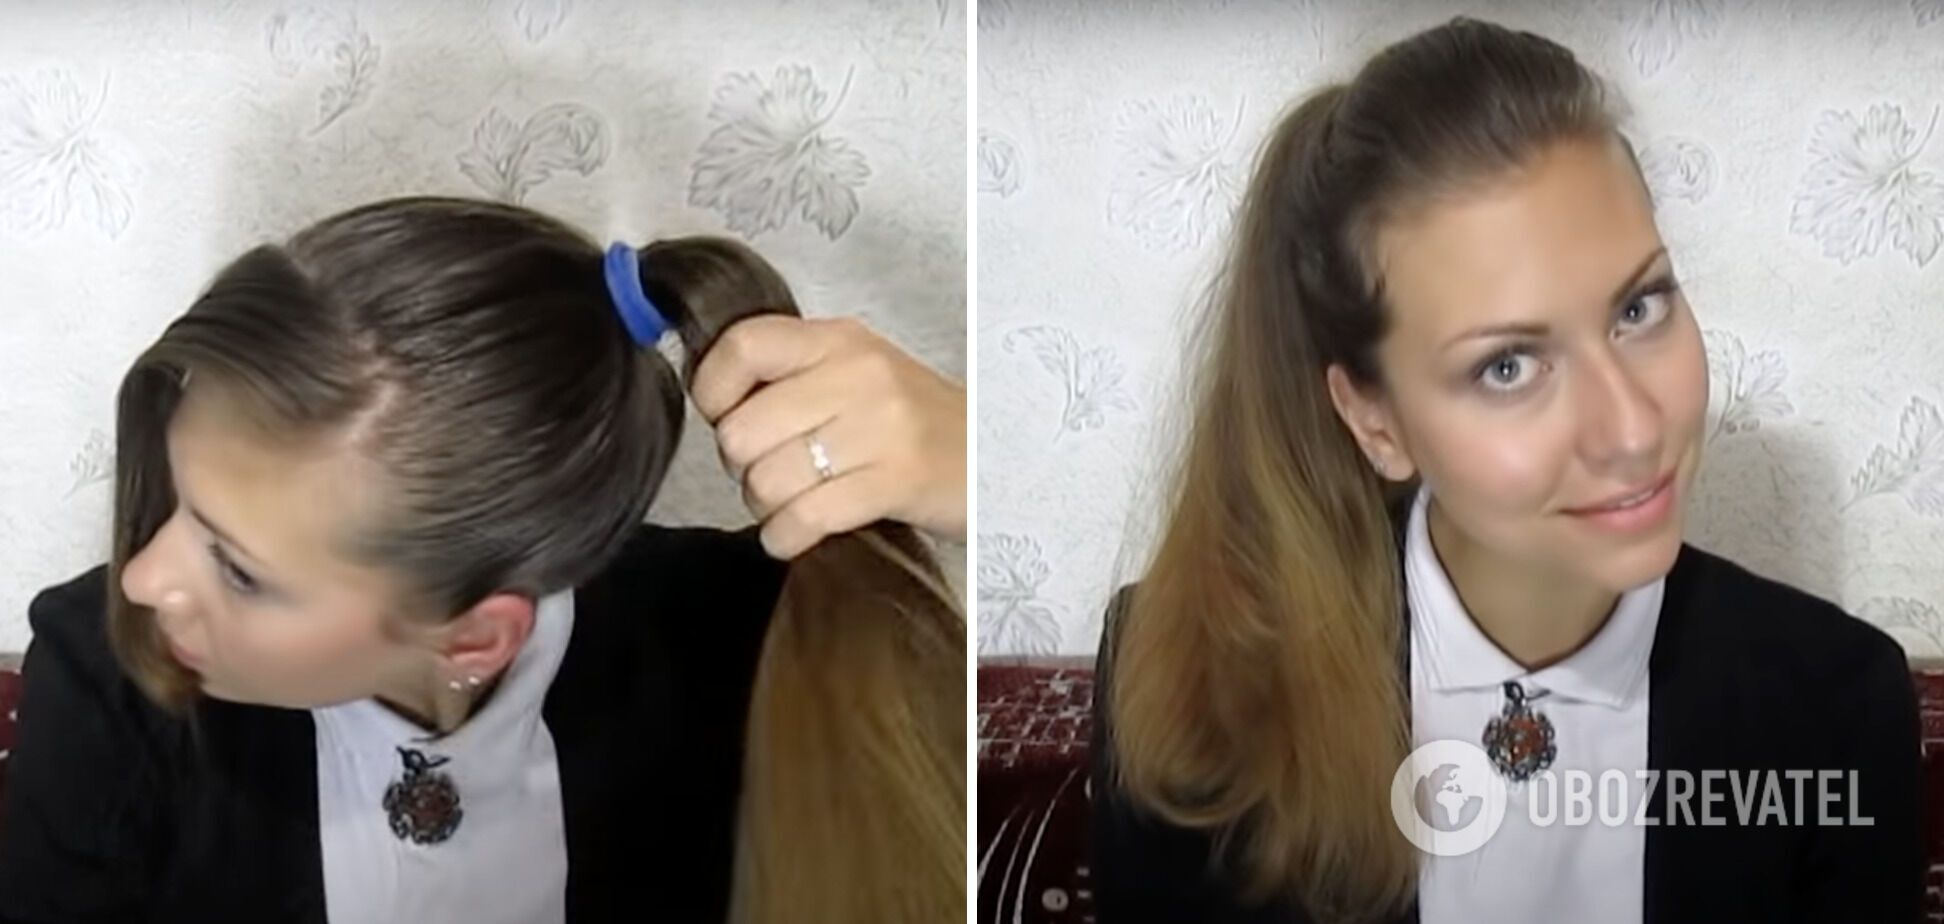 Comb-over will hide oily hair